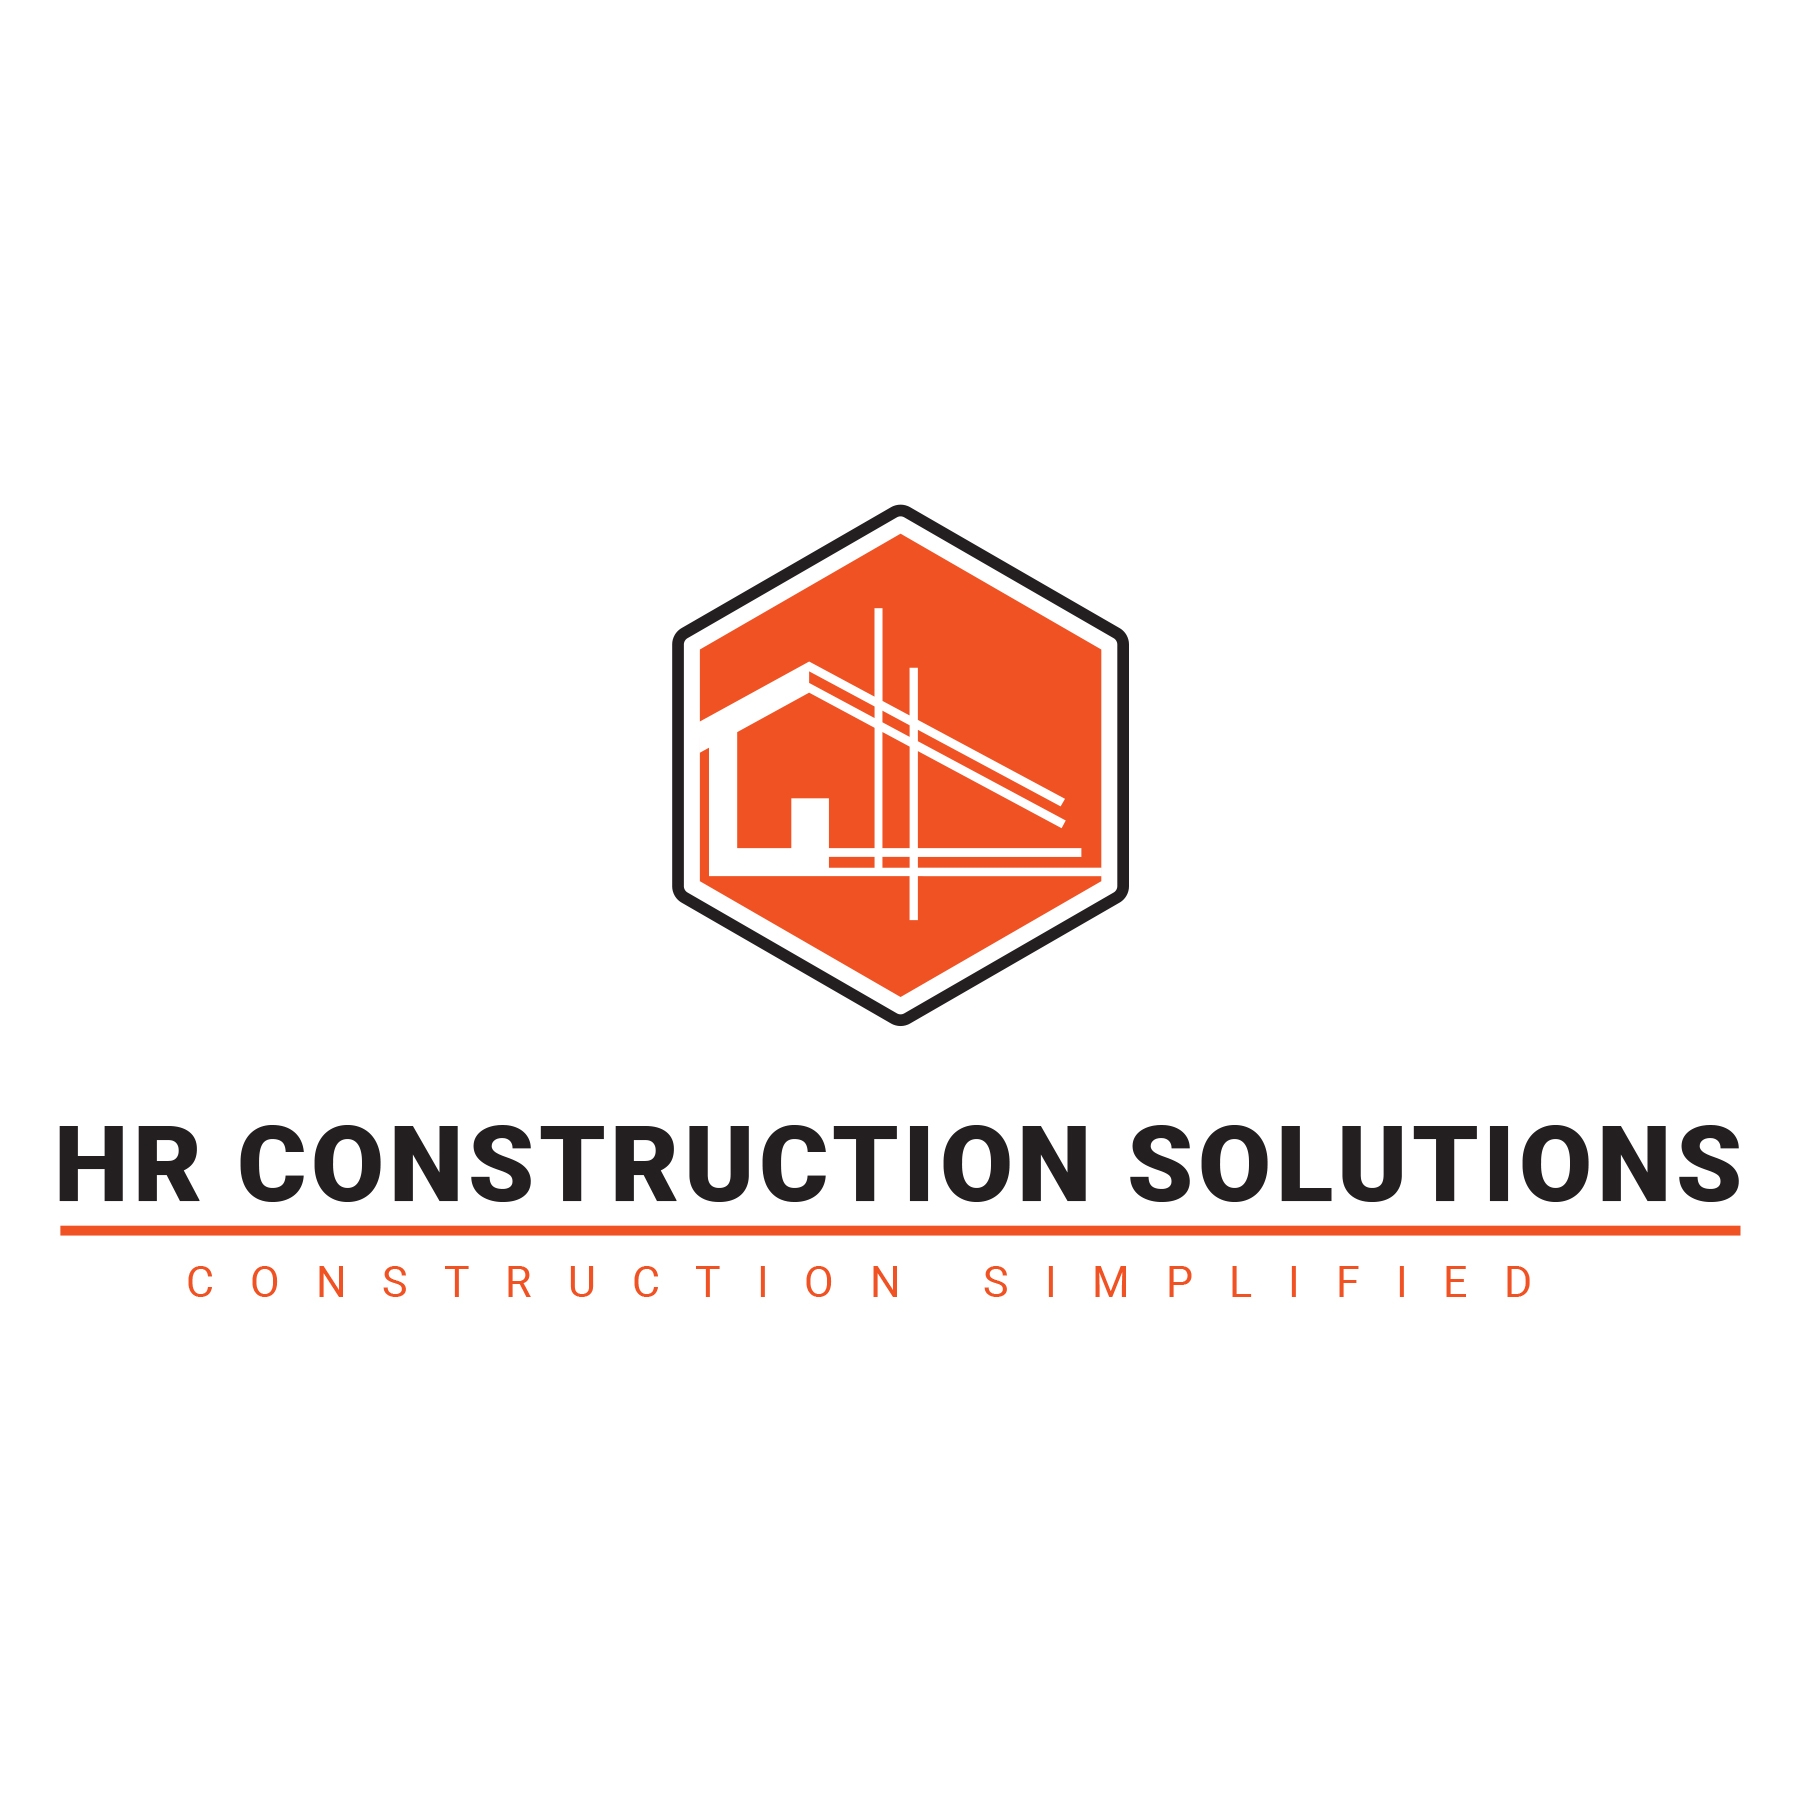 HR Construction Solutions|Architect|Professional Services